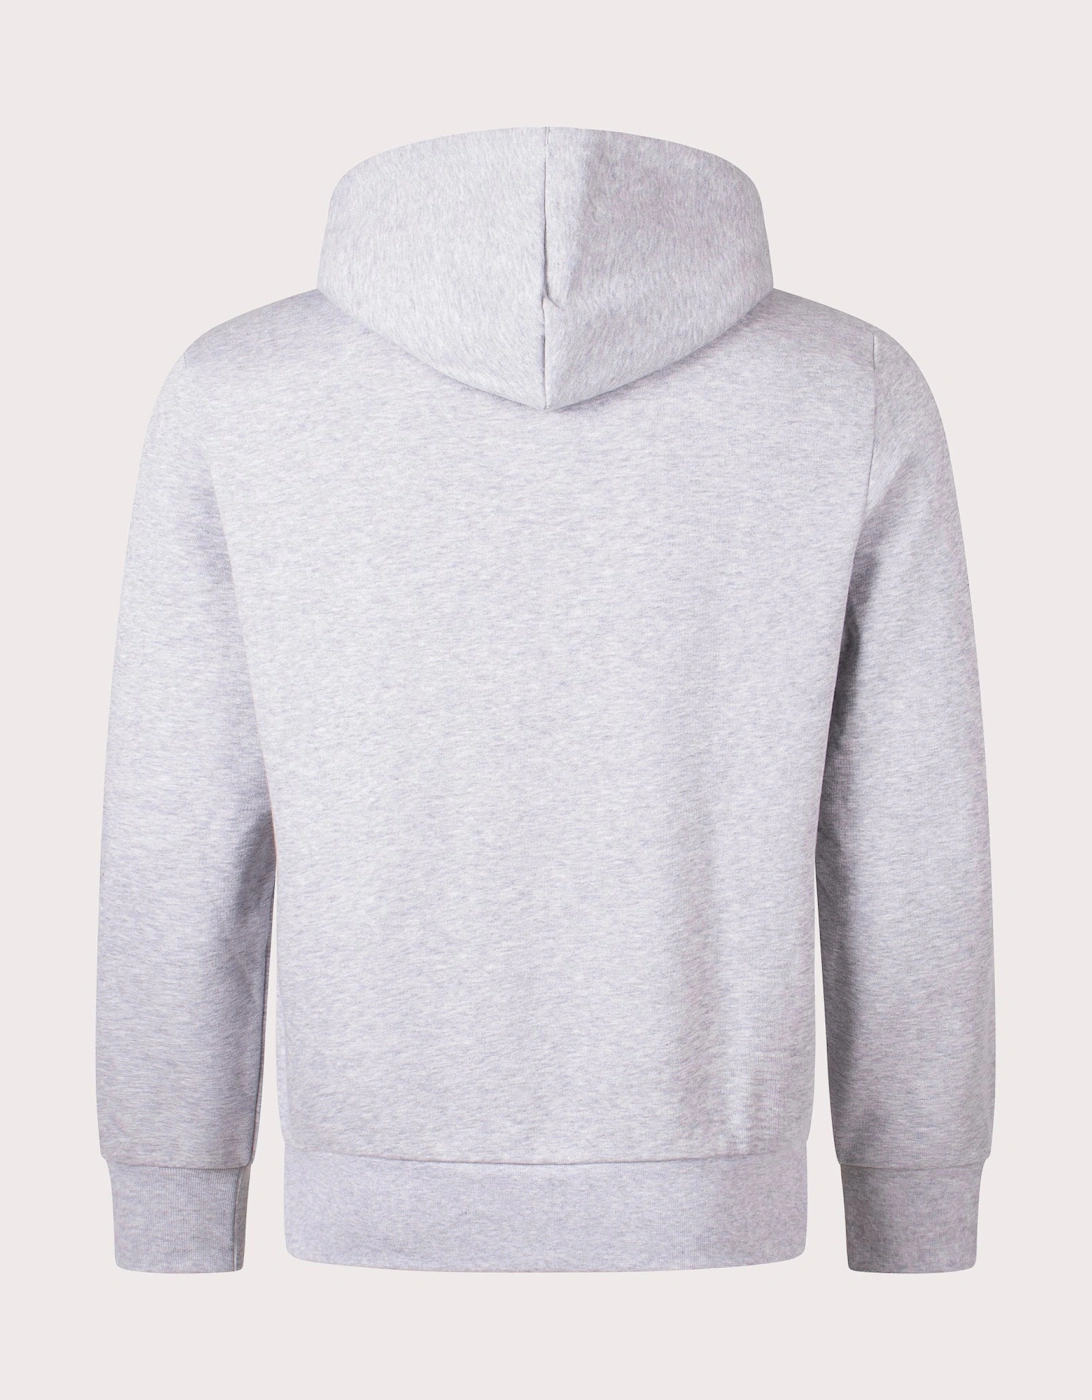 Relaxed Fit Brushed Fleece Hoodie